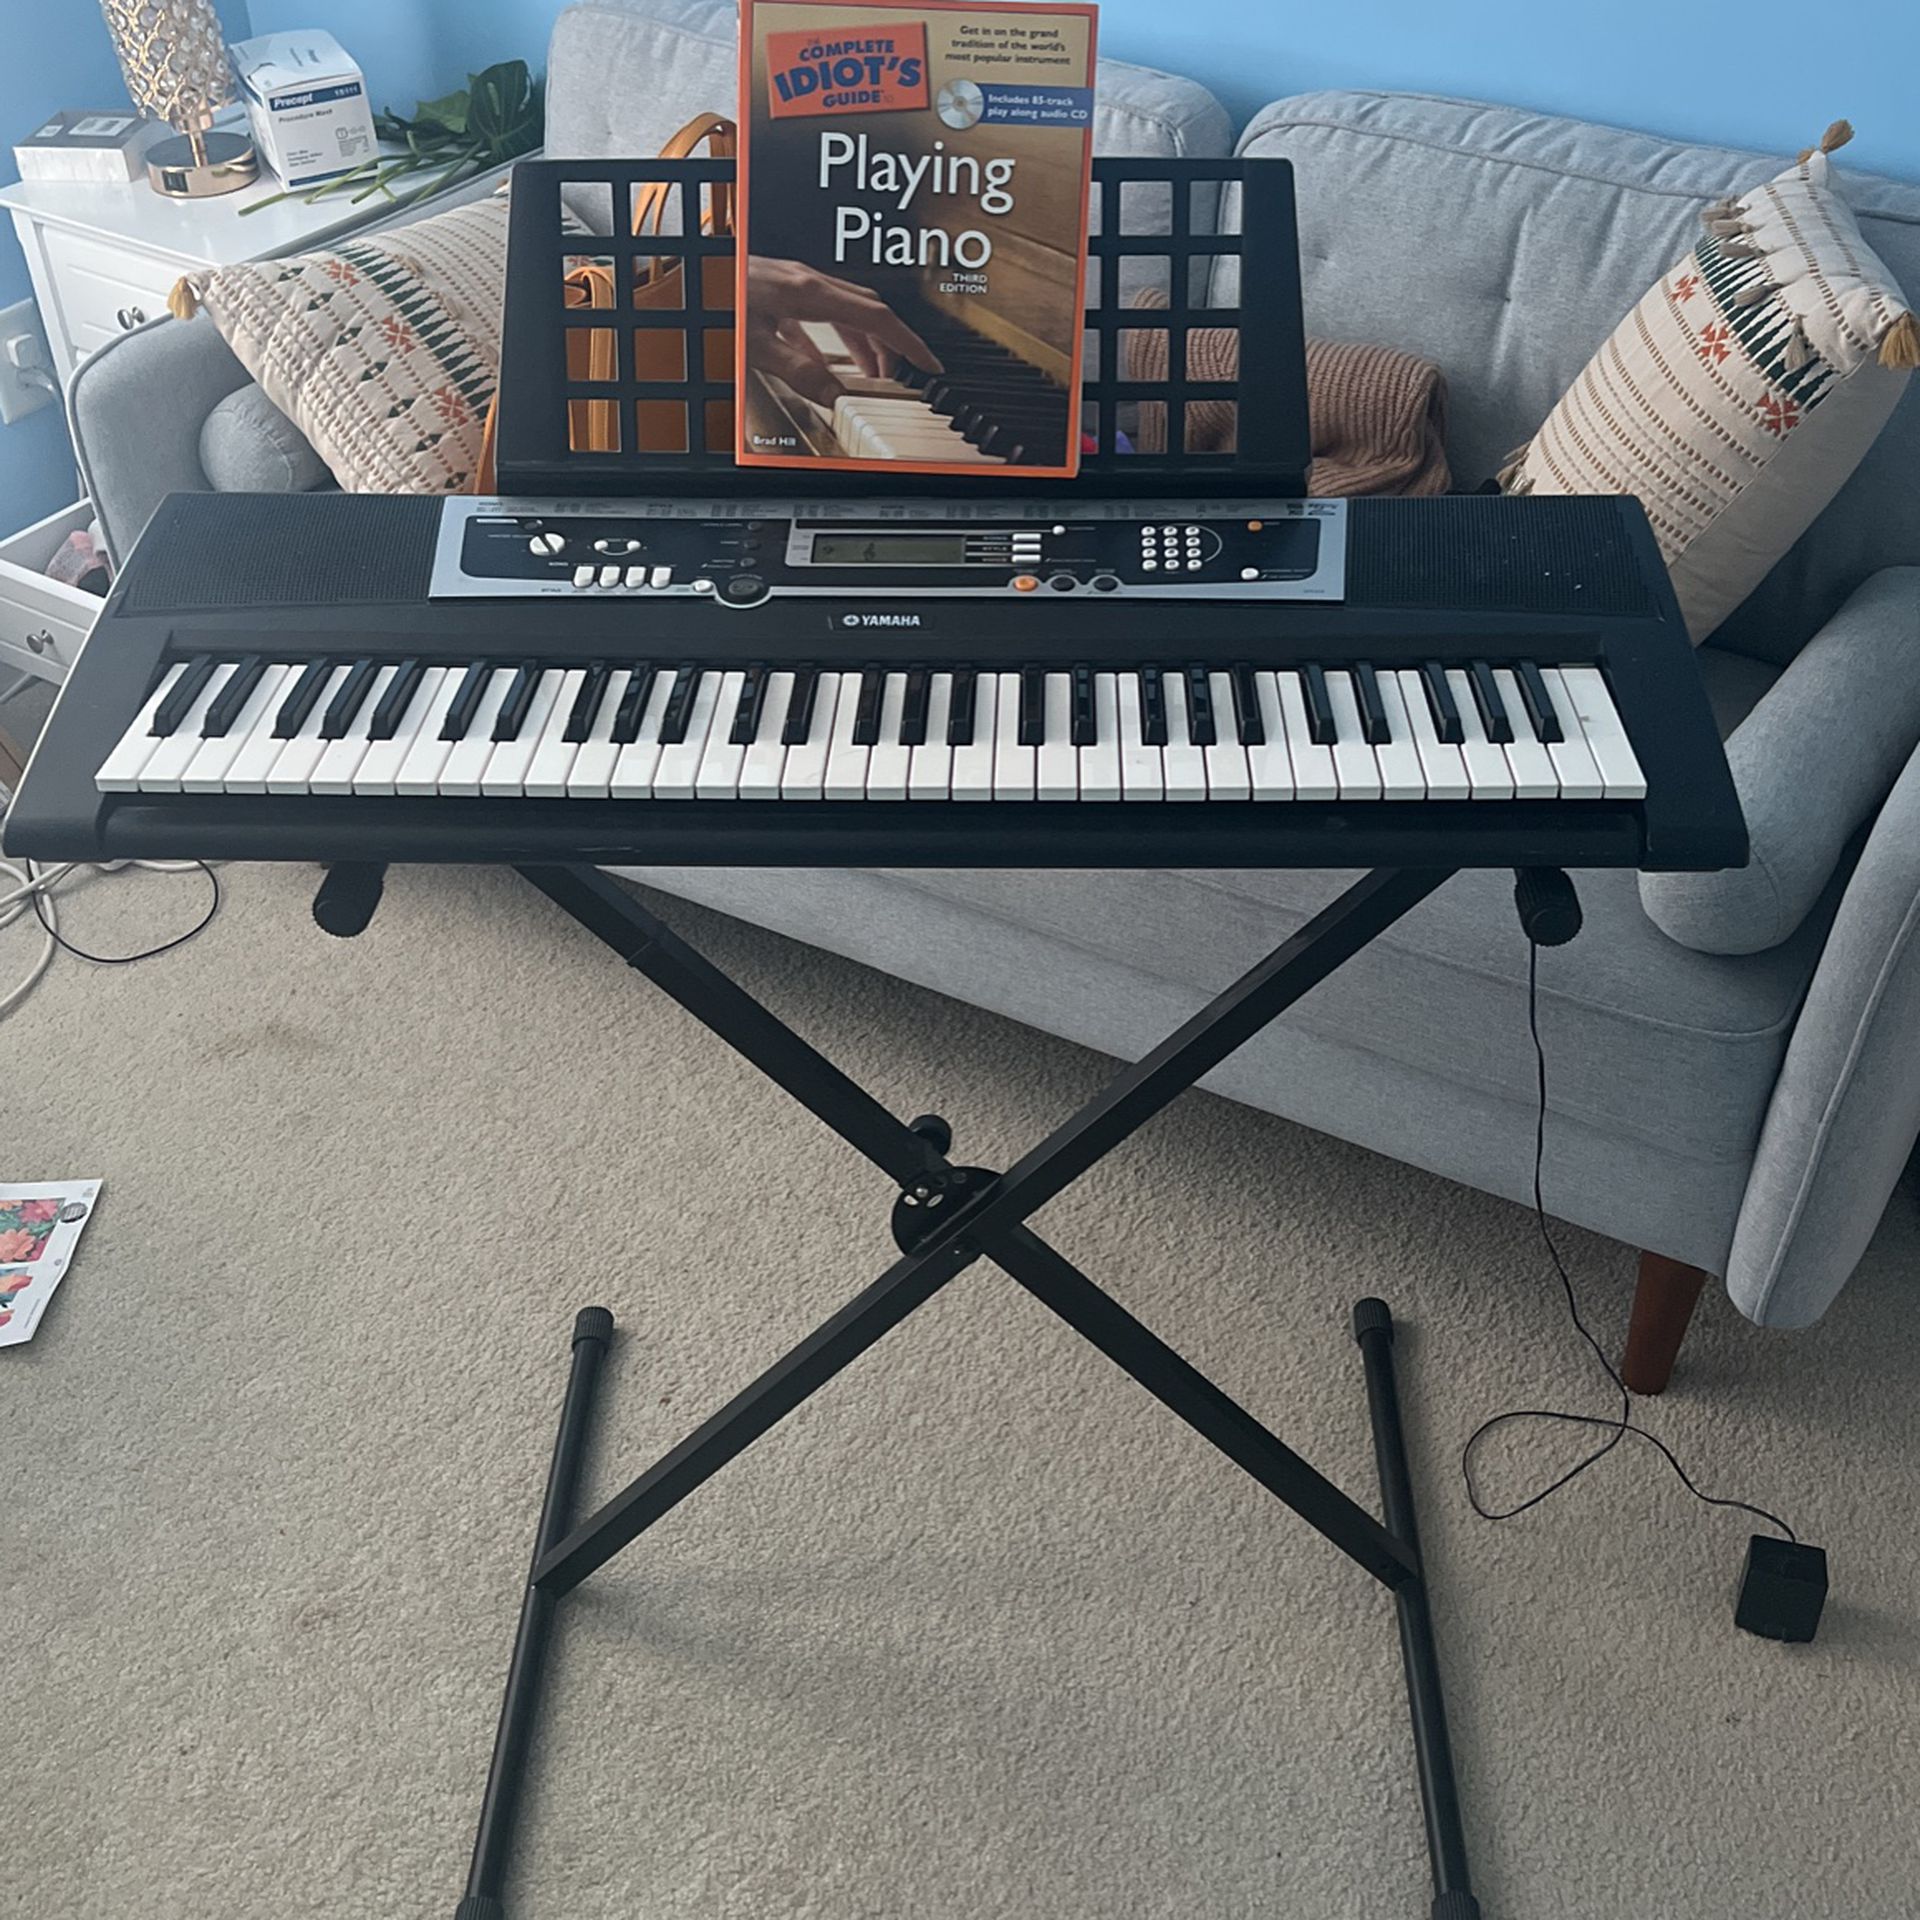 Keyboard, Stand, Piano Lessons Book